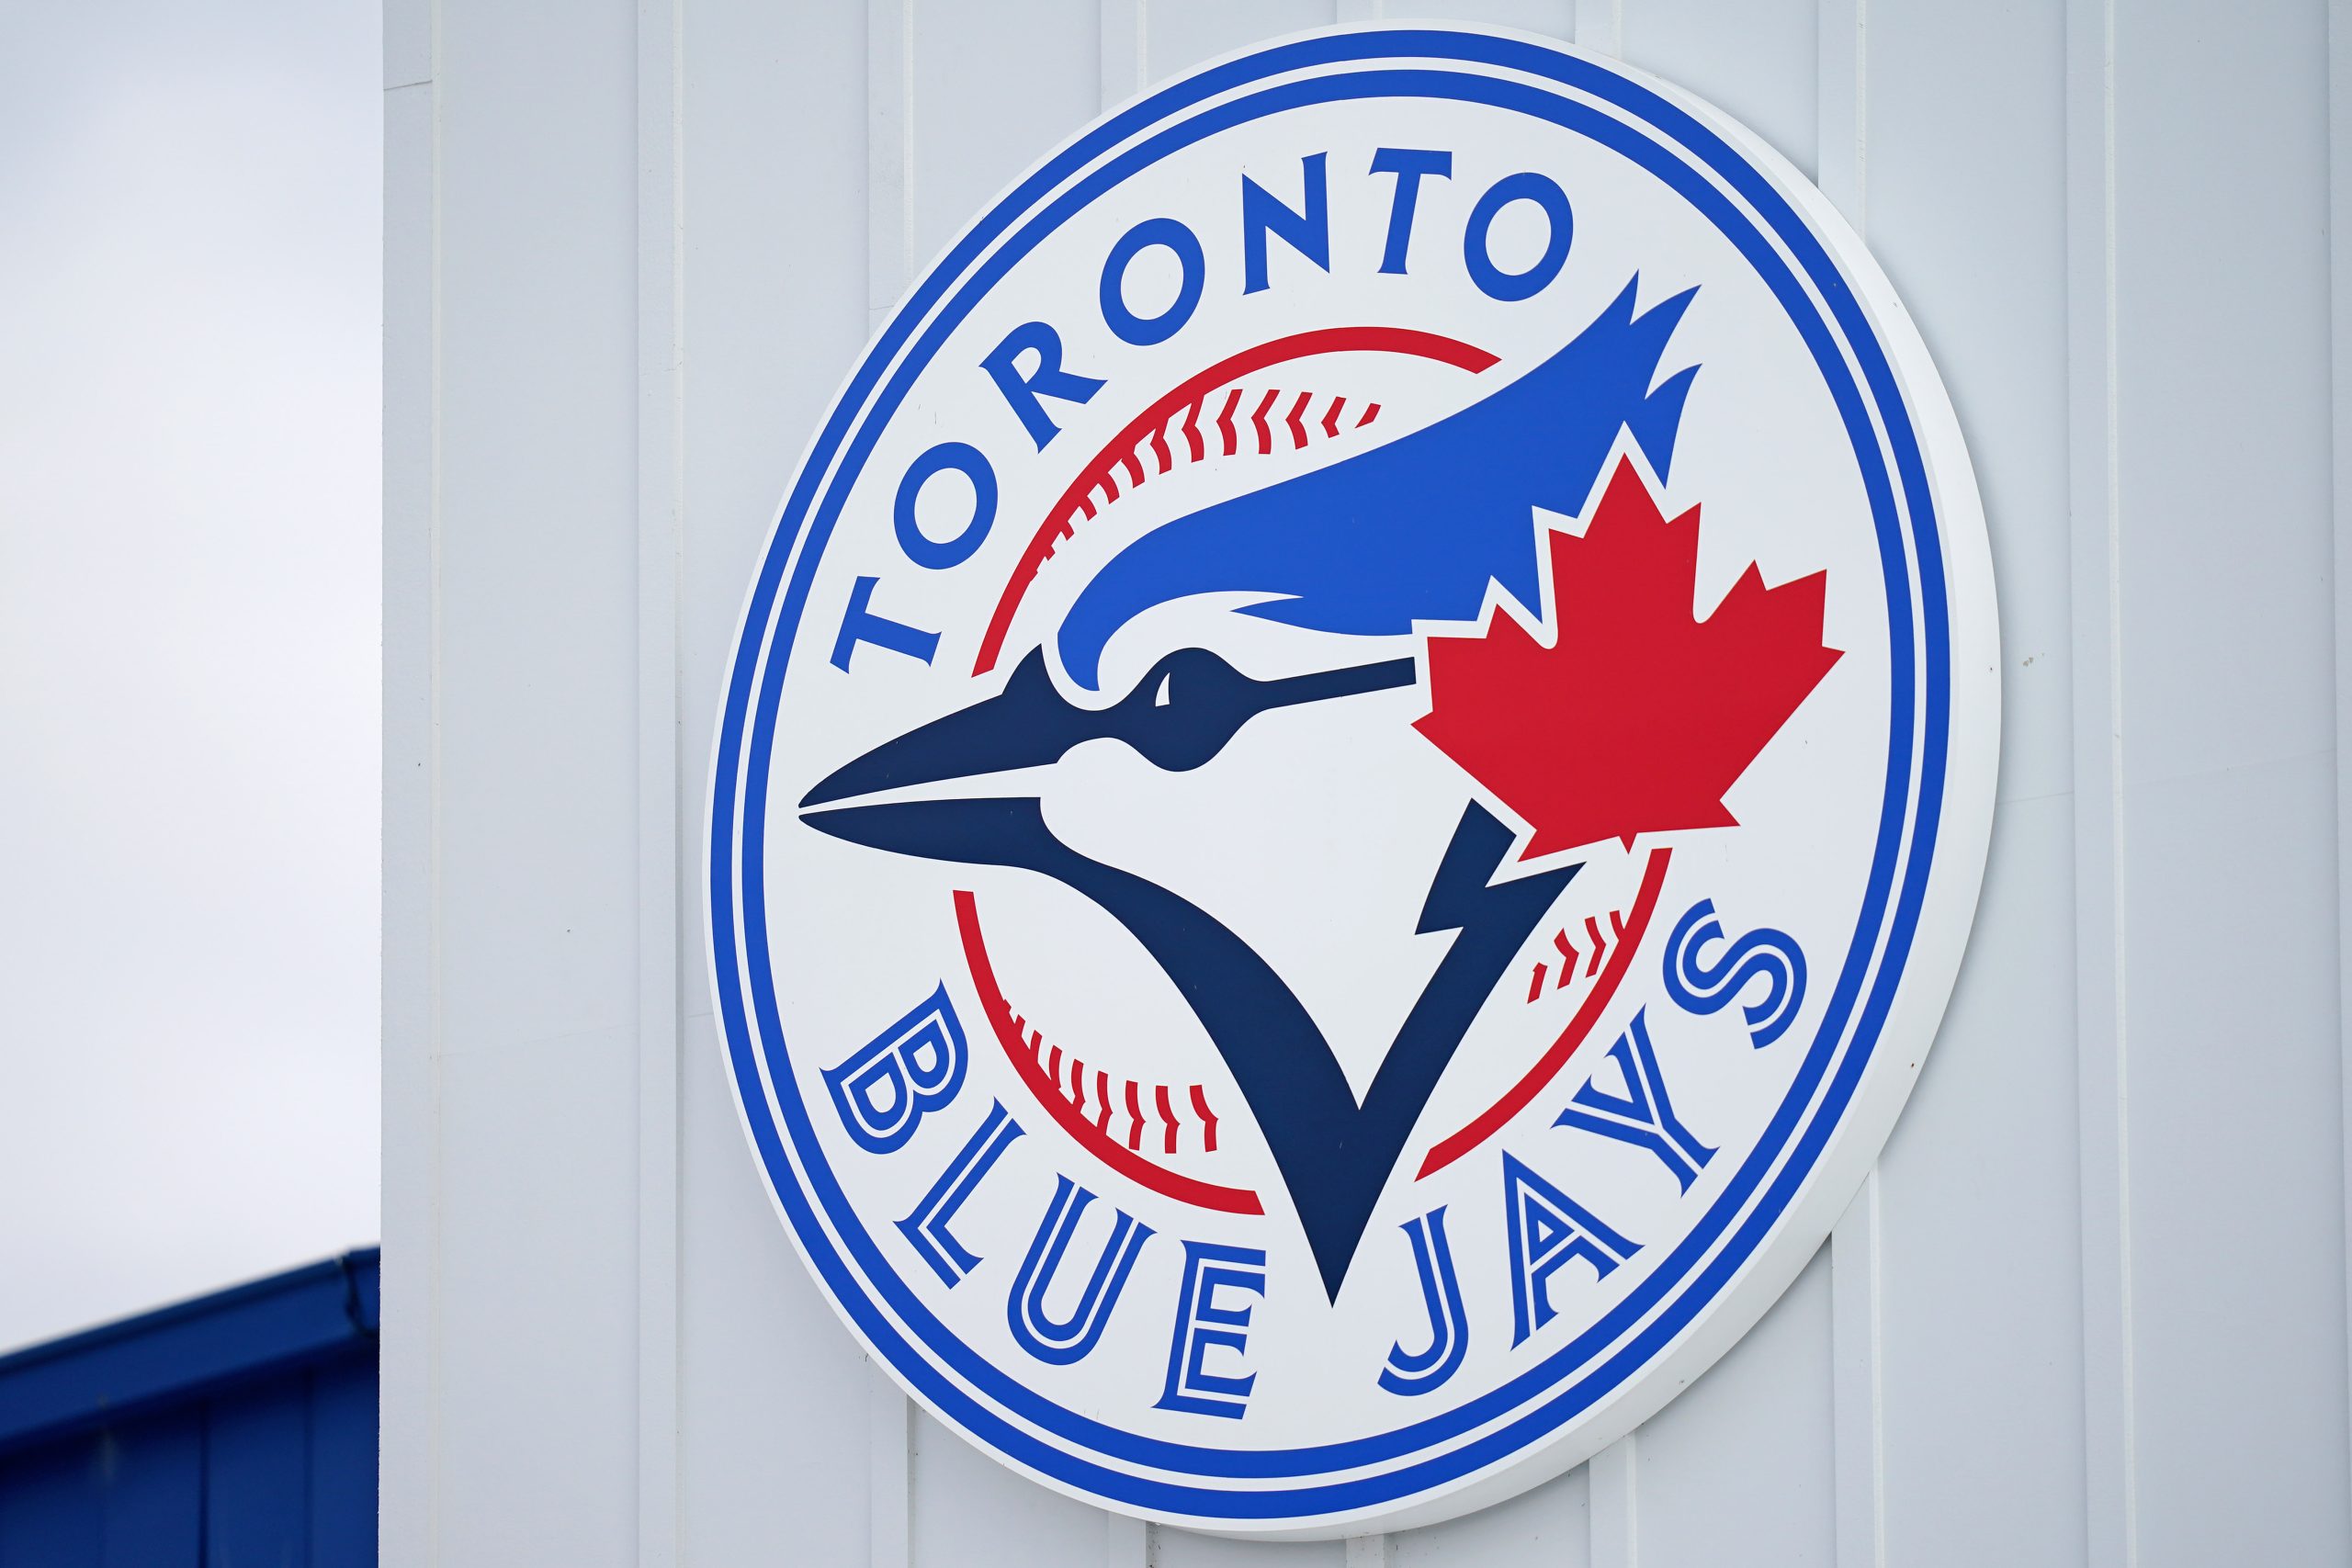 For 10 minutes during Saturday's Sportsnet remote broadcast of the Blue Jays vs. Cardinals game, a fire alarm went off.